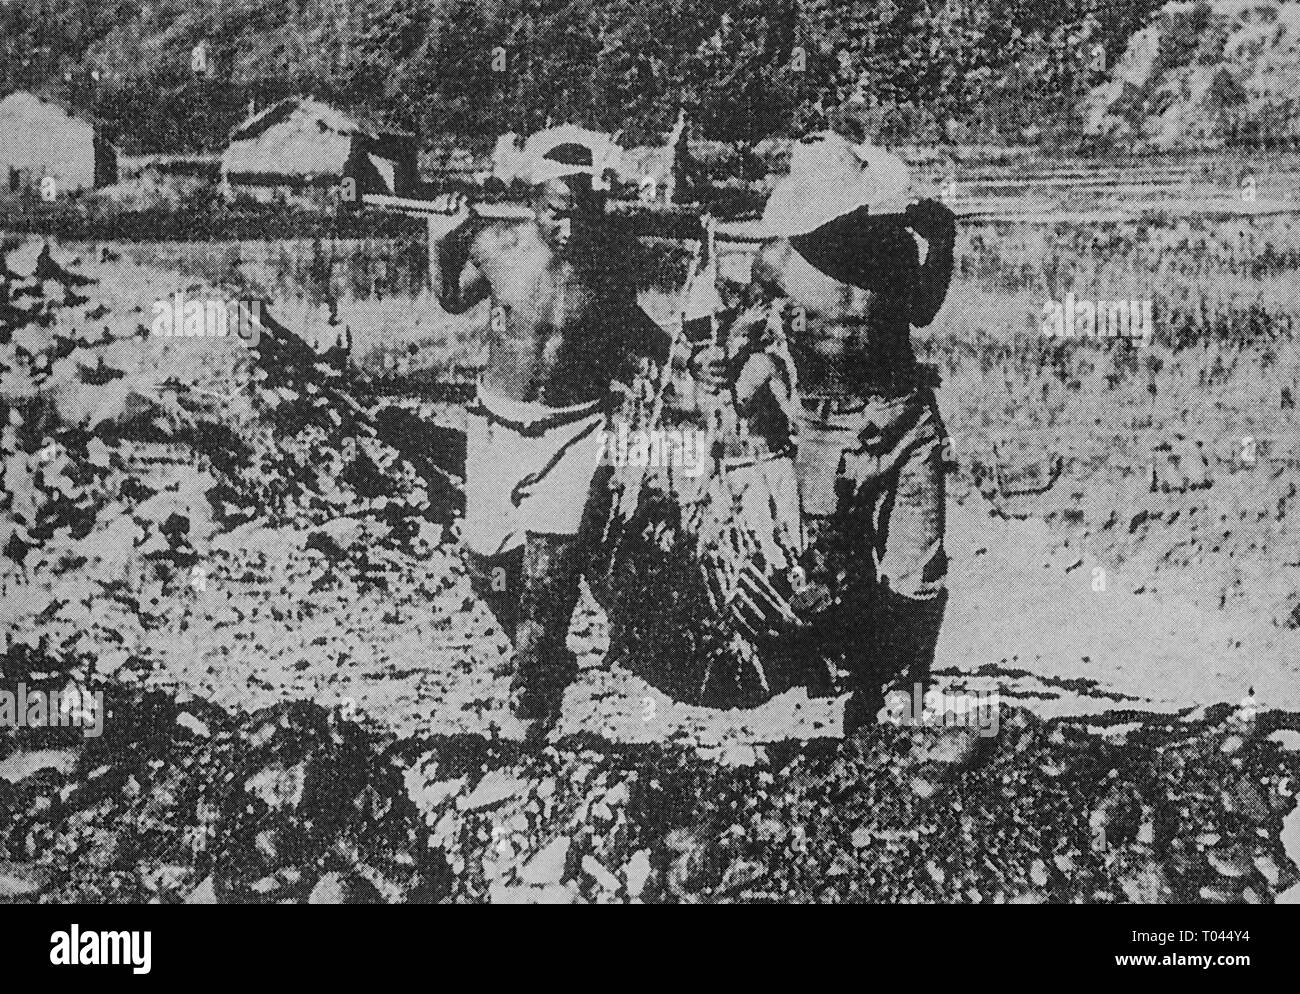 Korean workers engaging mining labor, c 1940, Hokkaido, Japan, Private Collection Stock Photo